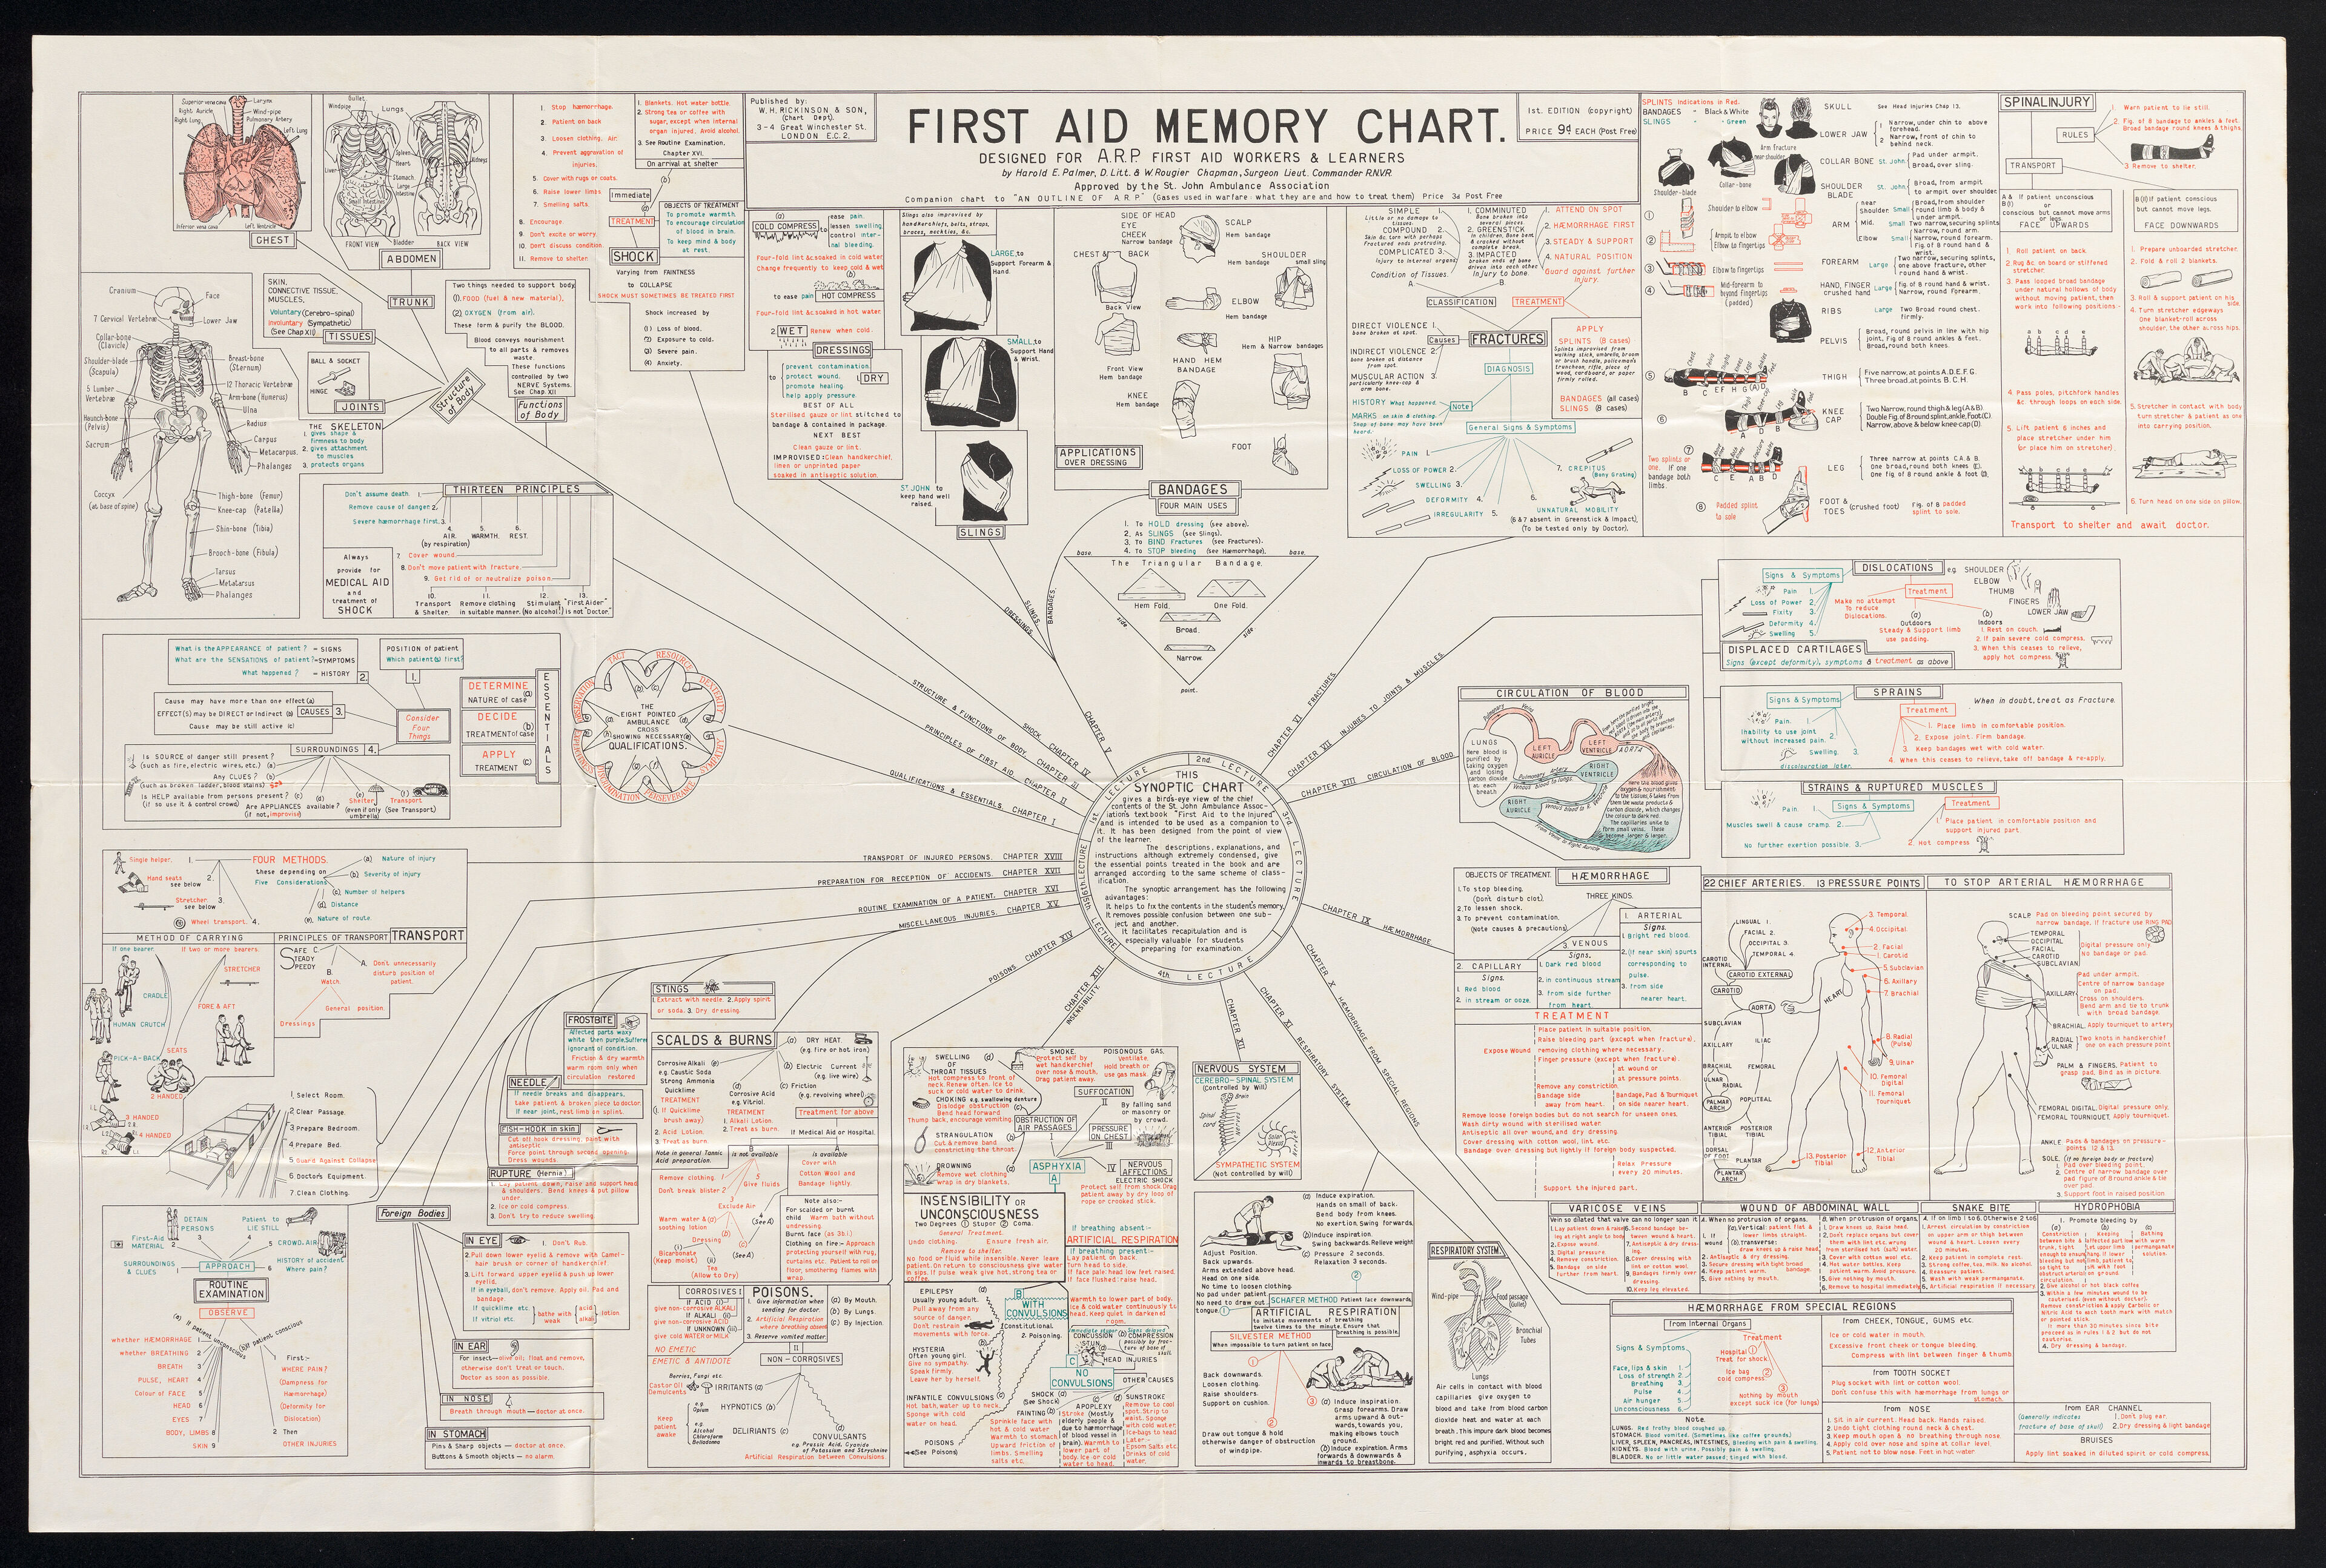 First aid memory chart : designed for A.R.P. first aid workers & learners / by Harold E. Palmer, D. Litt. & W. Rougier Chapman, Surgeon Lieut. Commander R.N.V.R. ; approved by the St. John Ambulance Association.